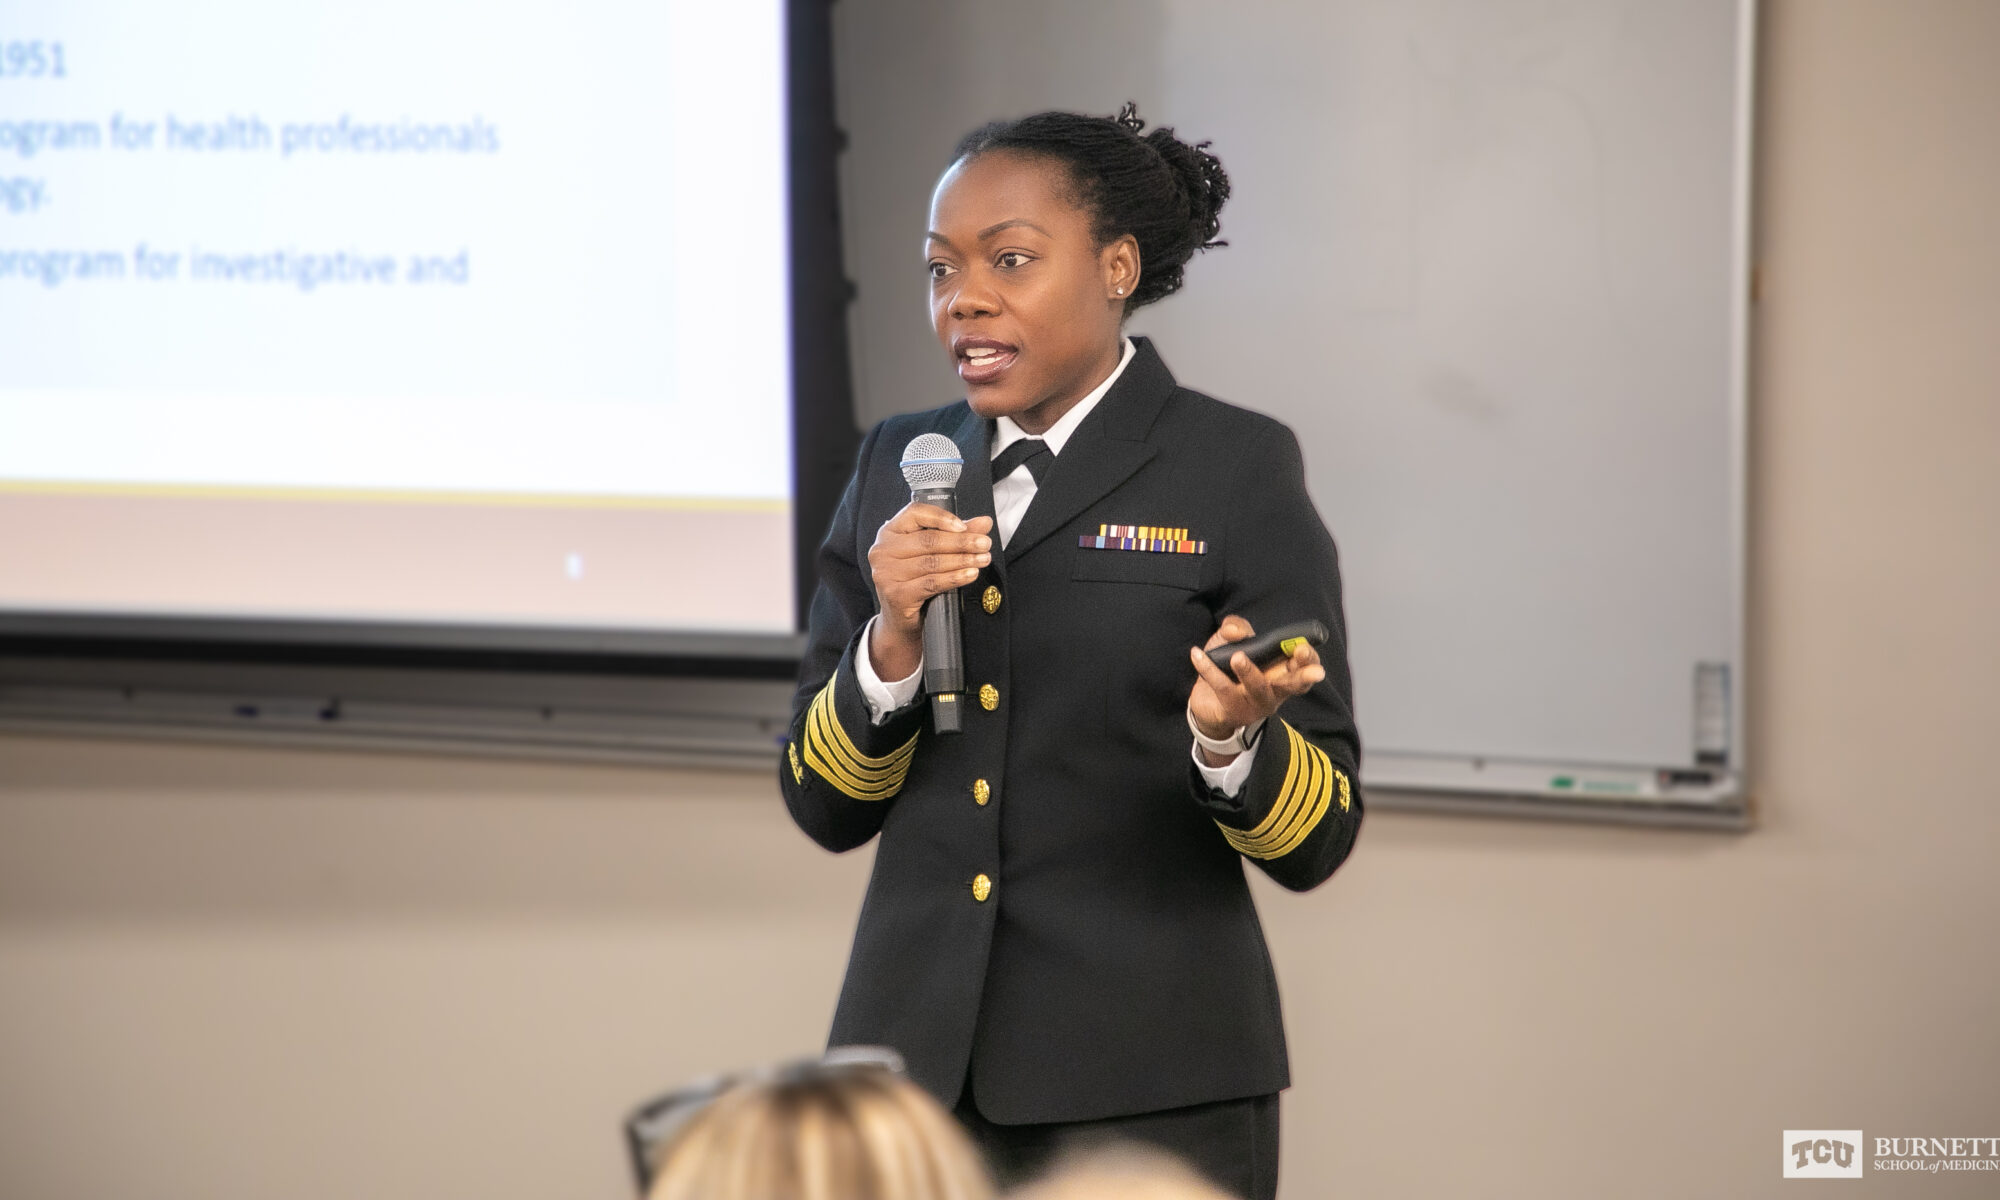 Ikwo Oboho, M.D., ScM, Director of Infection Prevention and Control Program for U.S. Department of Veteran Affairs in North Texas discussed outbreak response with medical students at Burnett School of Medicine at TCU .